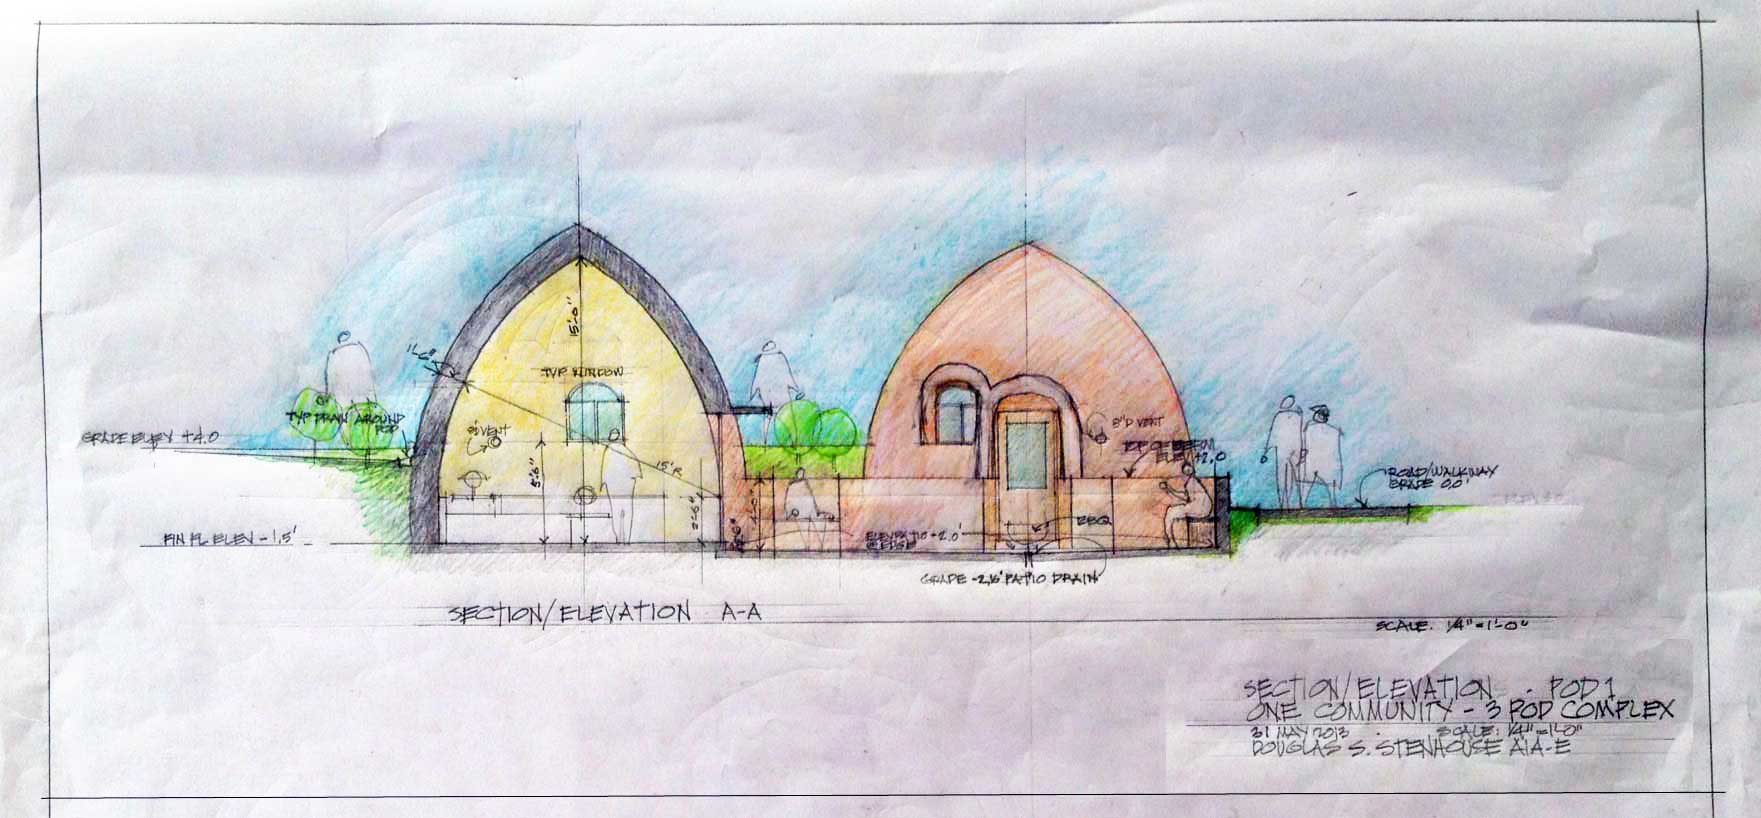 earthbag consruction, superadobe construction, super adobe construction, earth building, earth dome, dome home, One Community, sustainable living, eco living, dirt home, building with earth, earthbag village, sustainable building, construction of the future